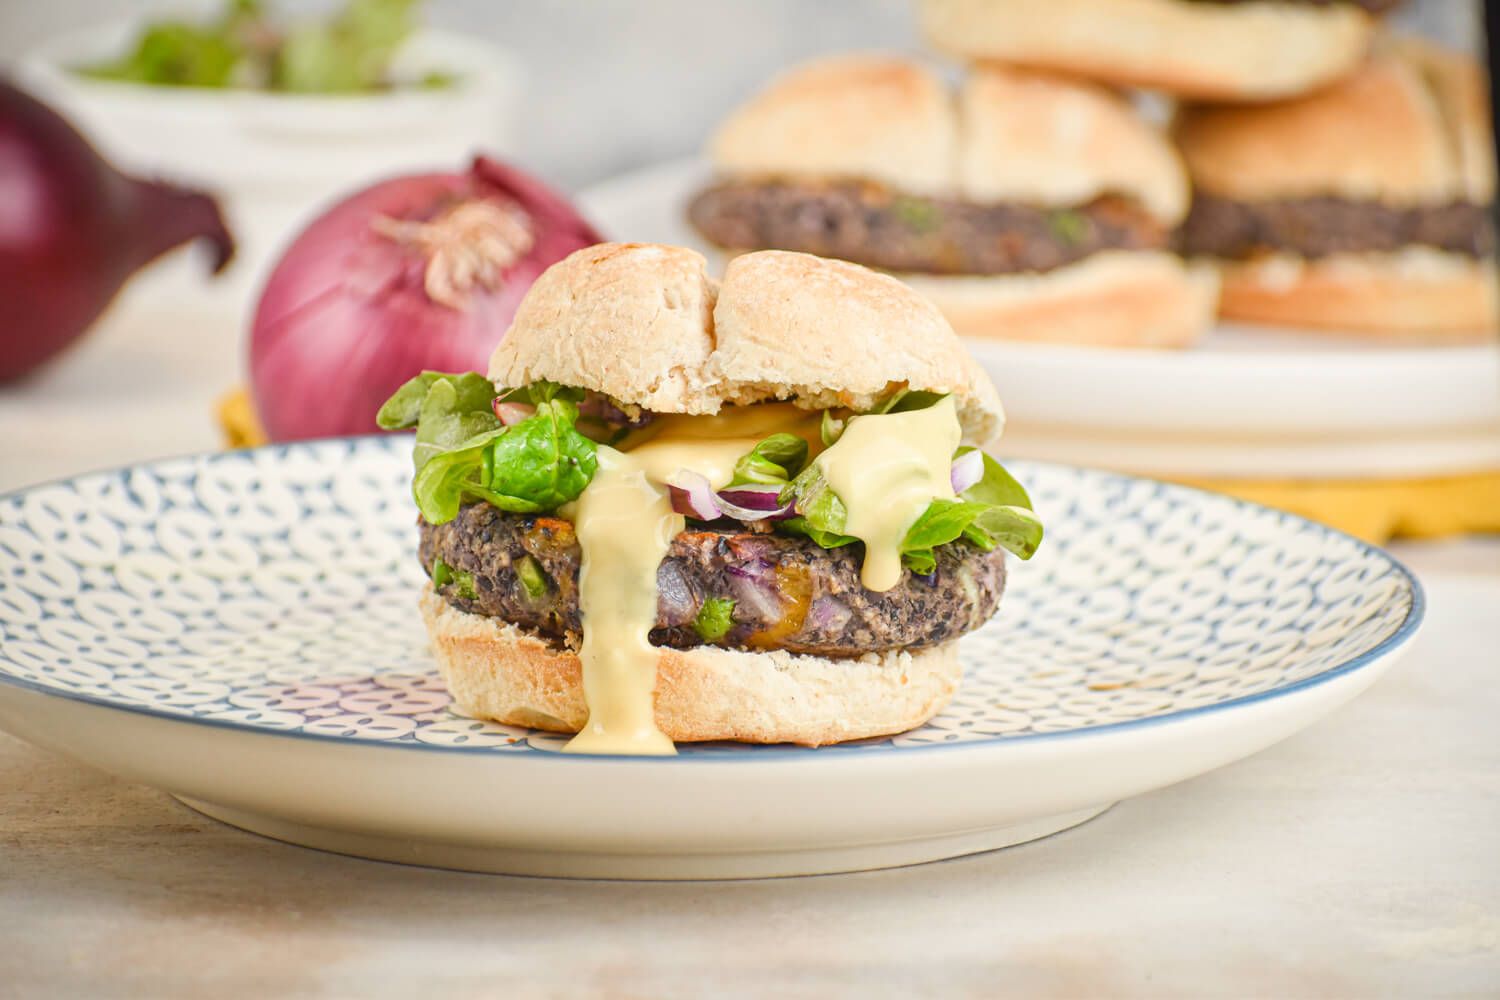 Jalapeno cheddar black bean burgers on a bun with lettuce, tomato, and onions.